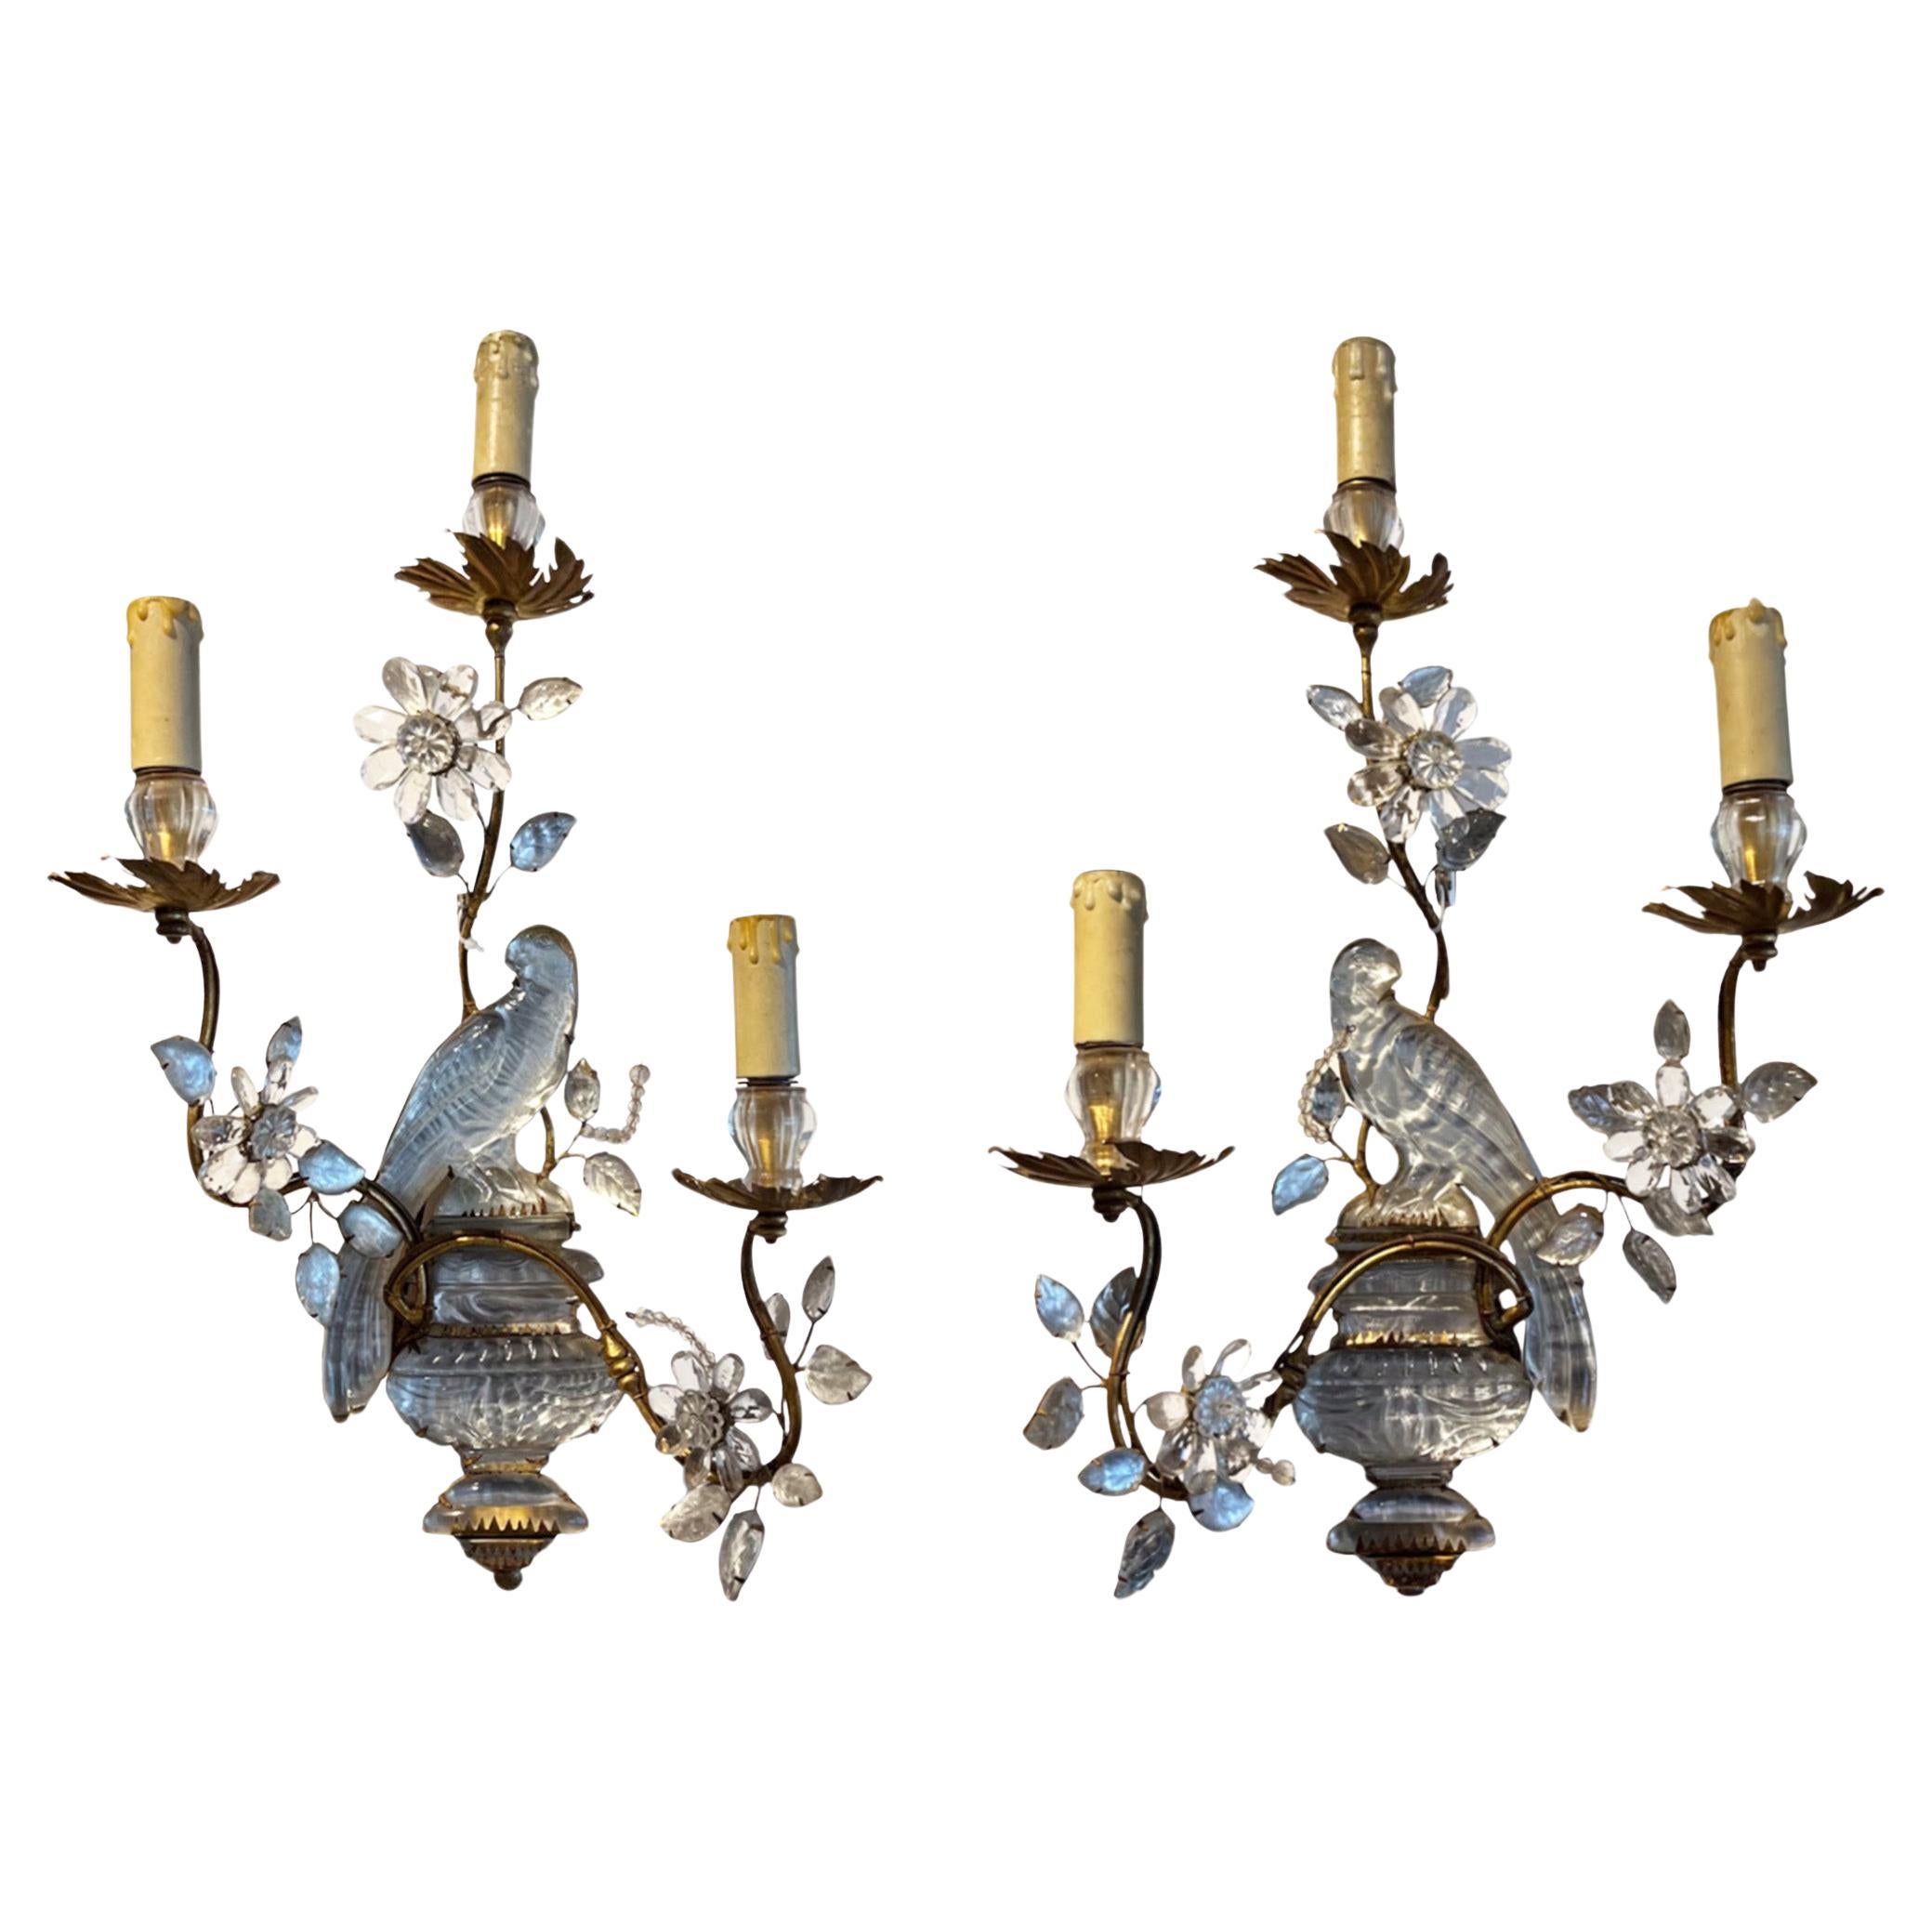 Large Pair of Maison Baguès Wall Sconces With Parrot, Urns & 3 Torches For Sale